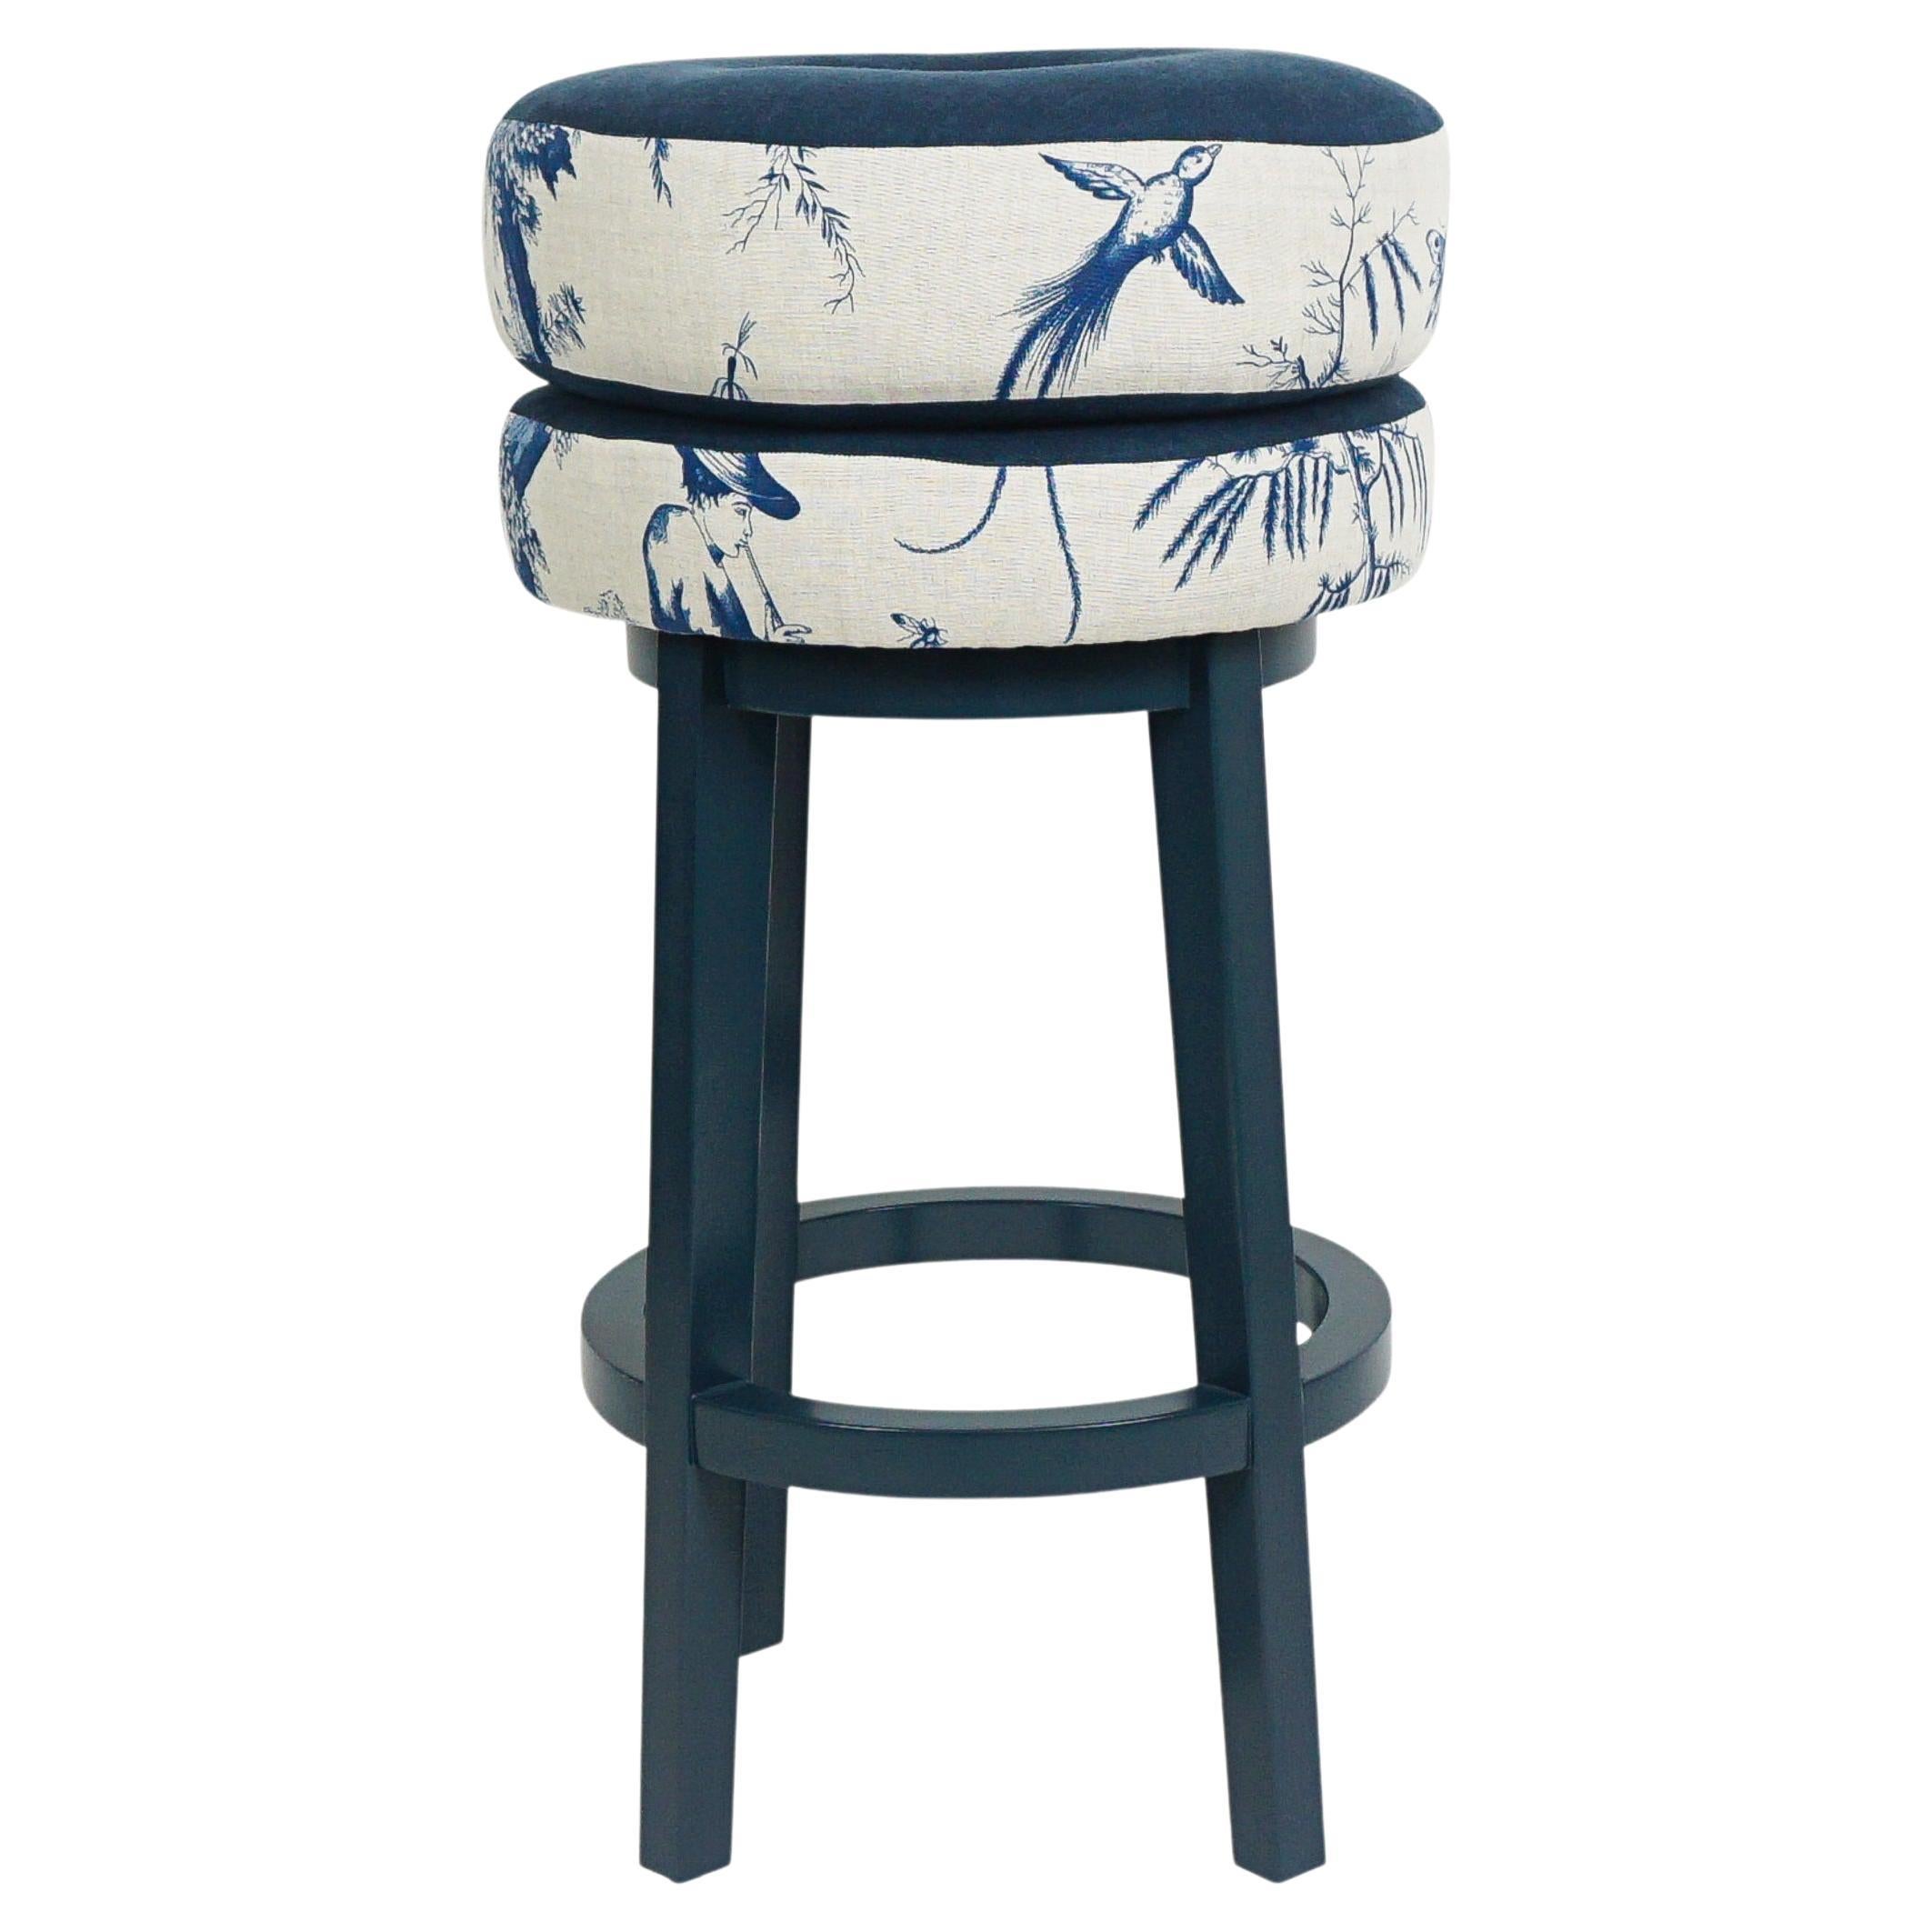 Modern Donut Shaped Bar Stool with Japanese Inspired Shengyou Toile For Sale